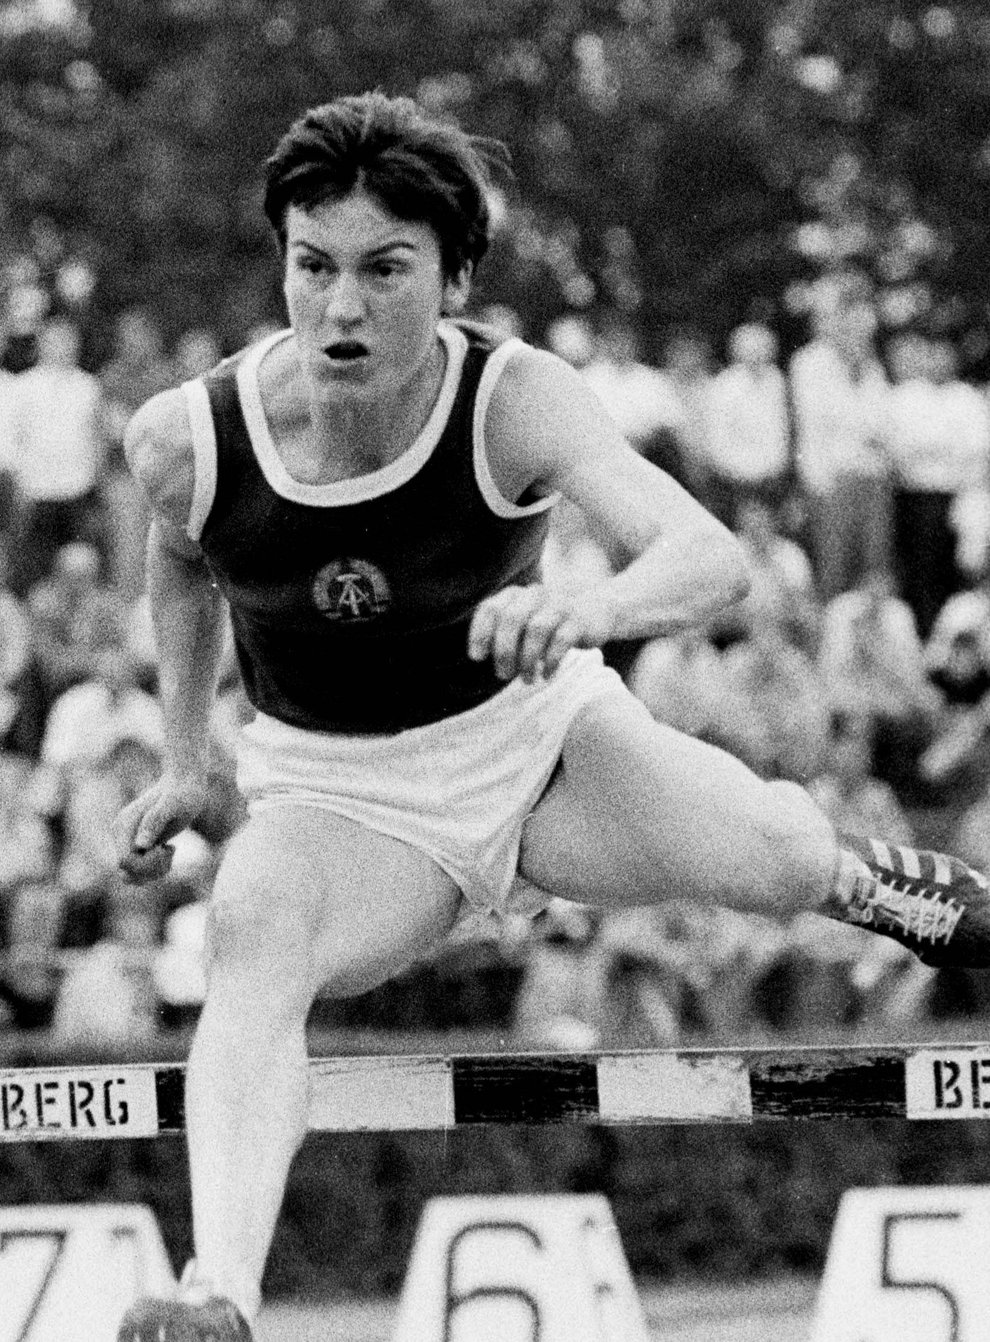 Balzer won a gold medal at the 1964 Olympics (PA Images)